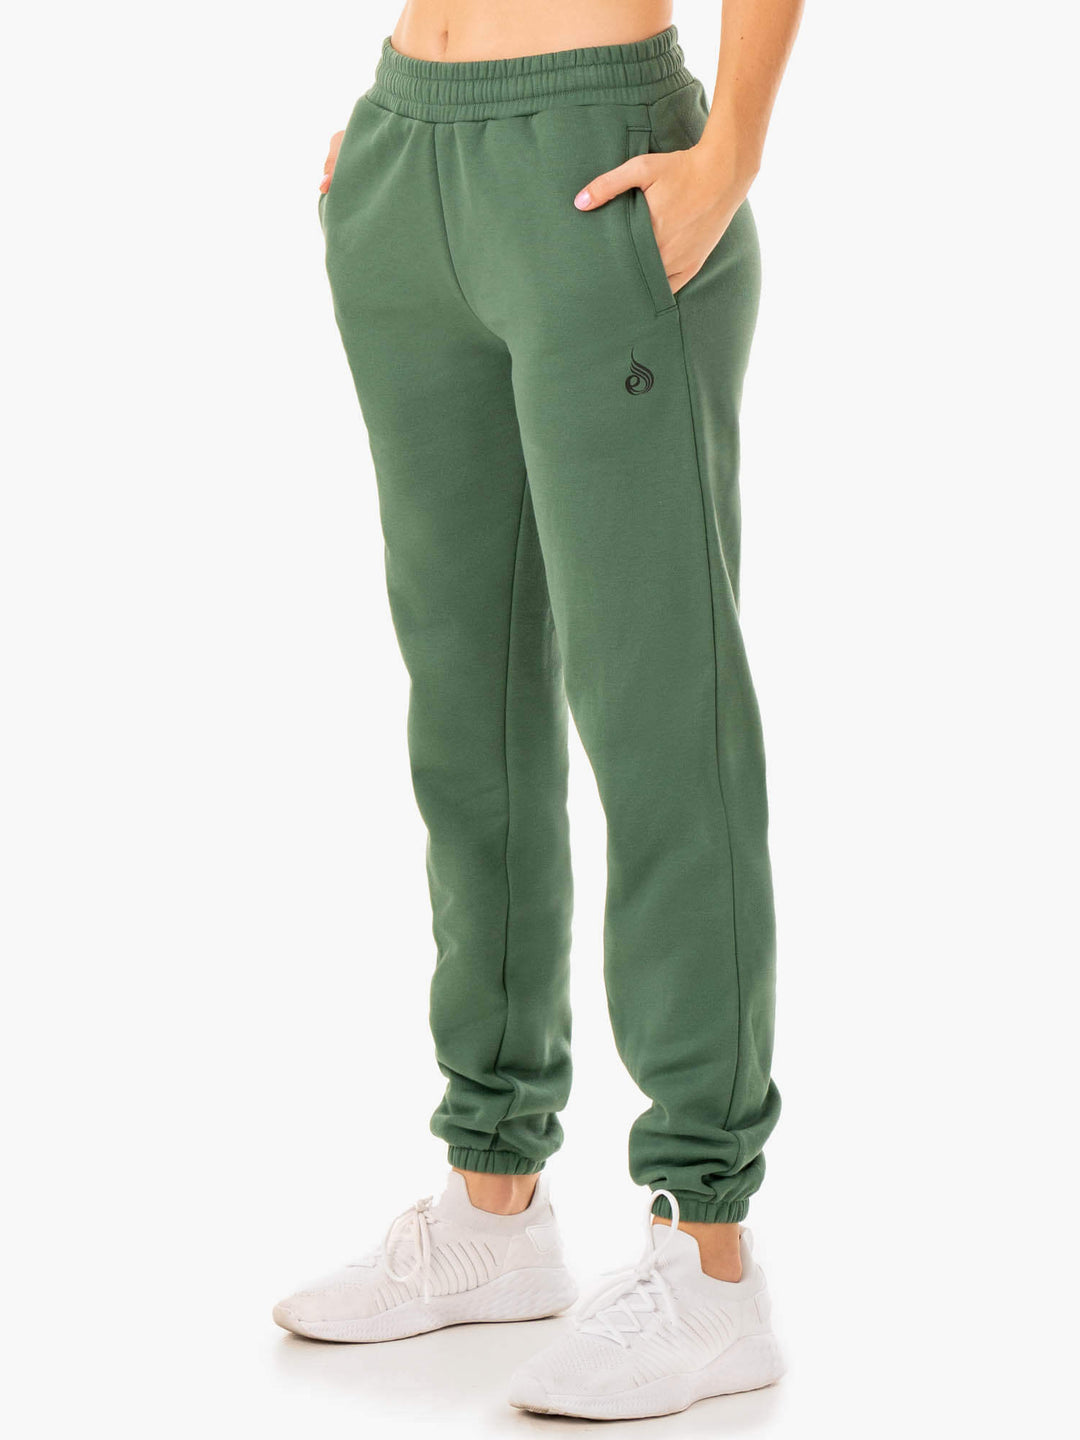 Unisex Track Pants - Forest Green Clothing Ryderwear 